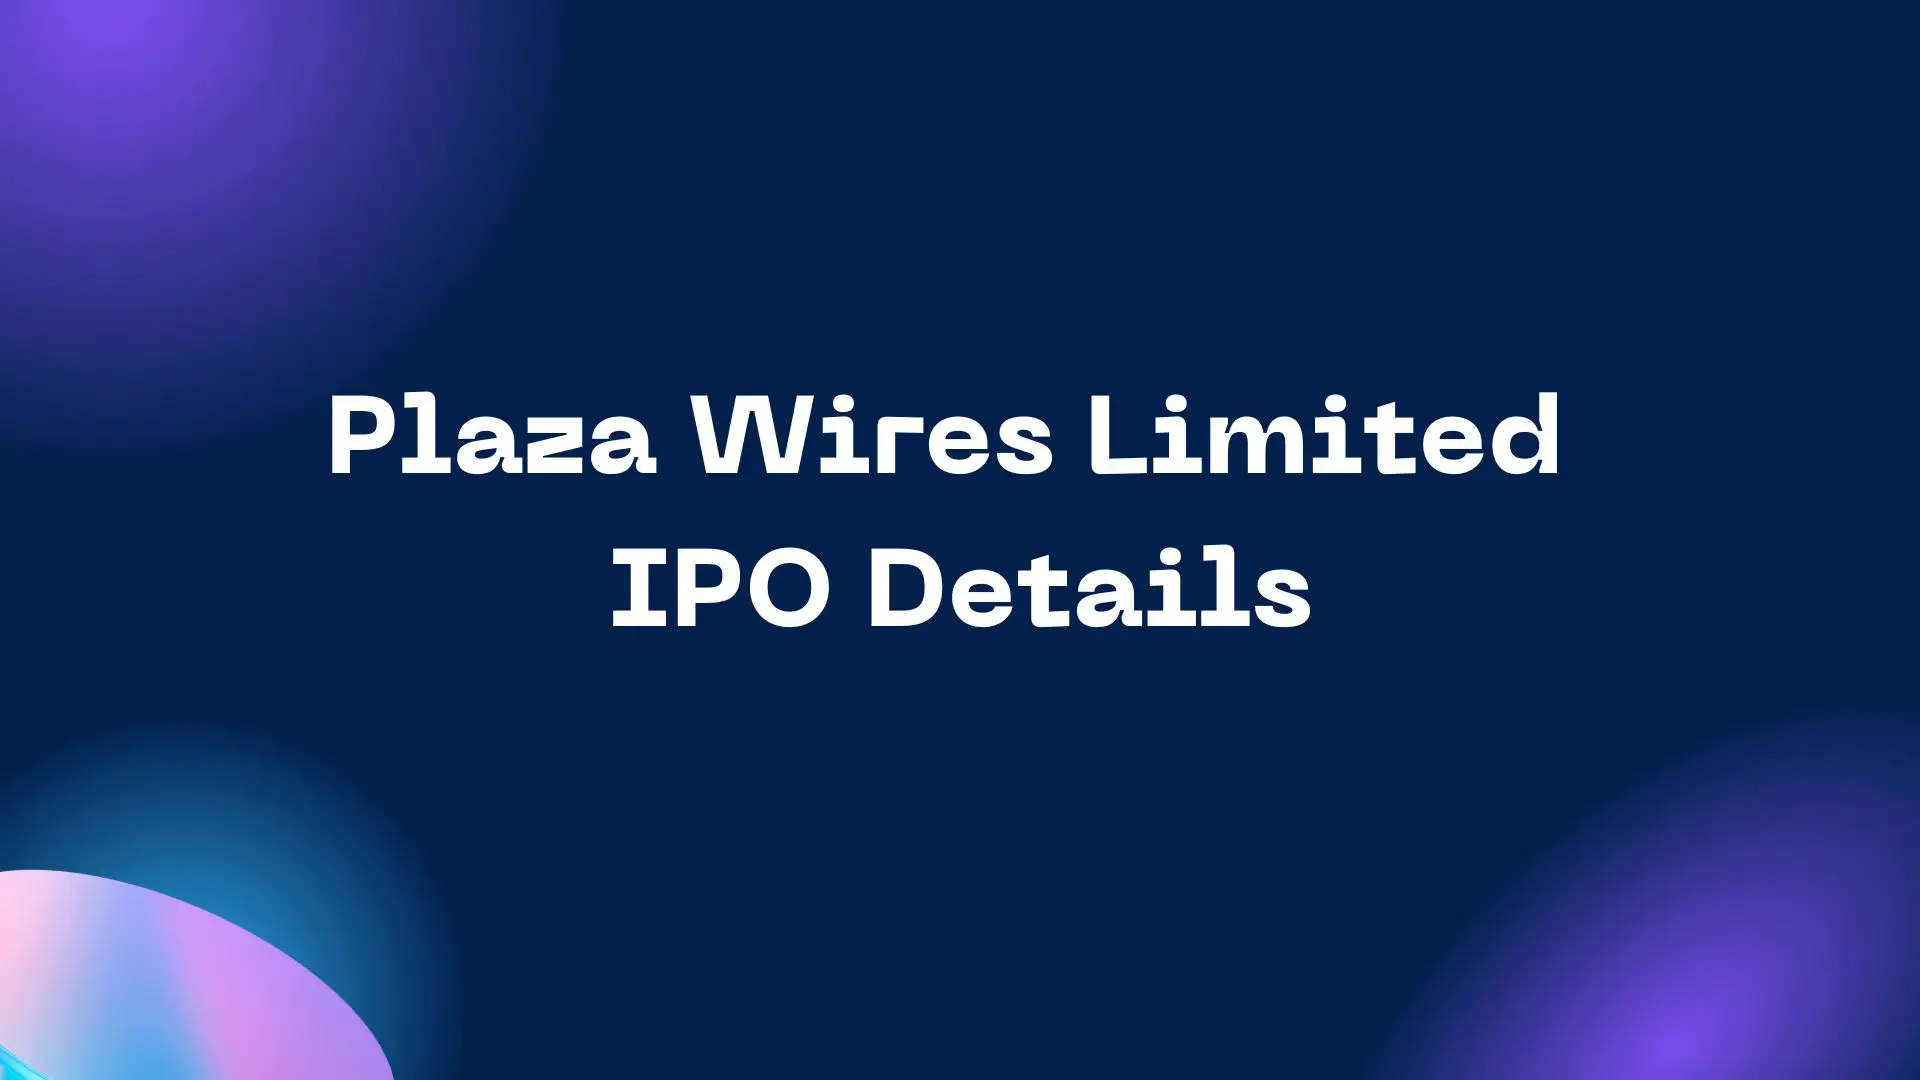 Plaza Wires Limited IPO Details